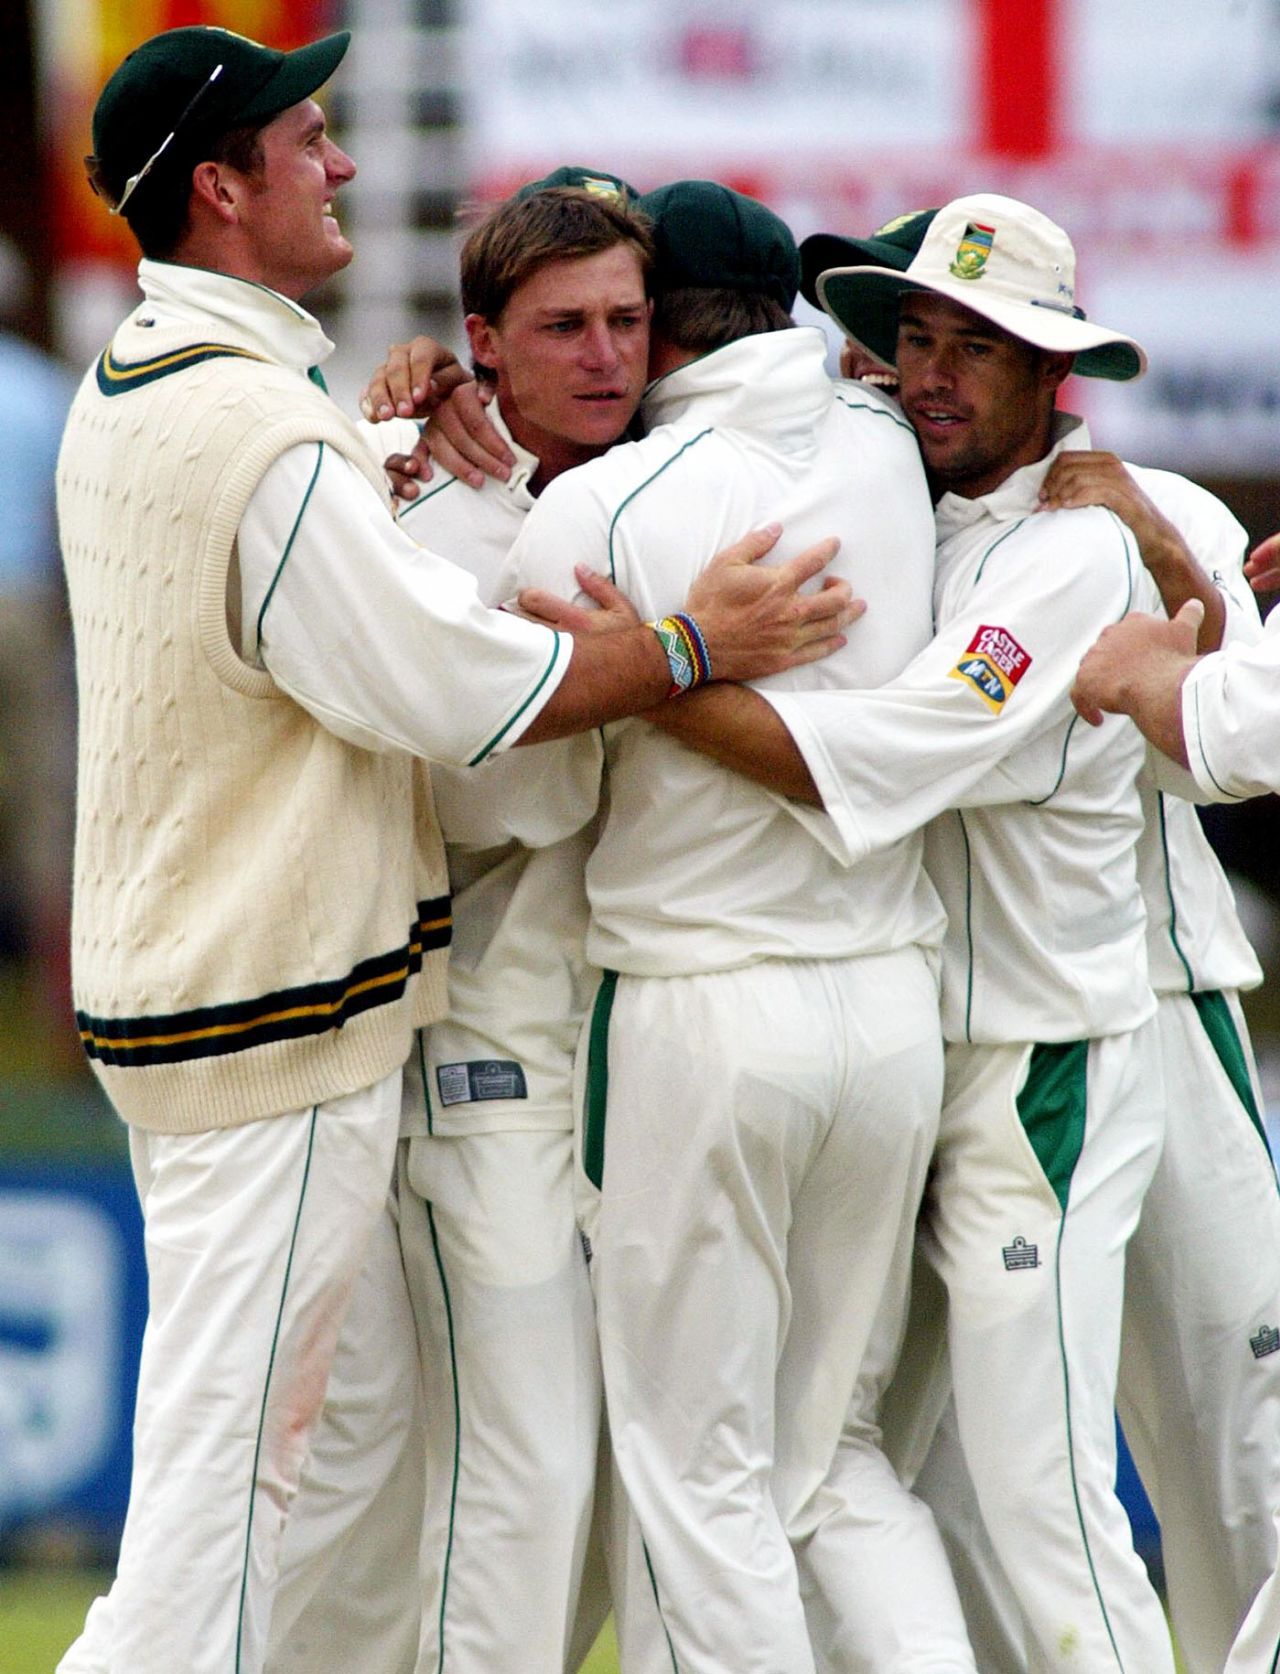 Team-mates congratulate Dale Steyn for Michael Vaughan's wicket, South Africa v England, 1st Test, Port Elizabeth, 4th day, December 20, 2004